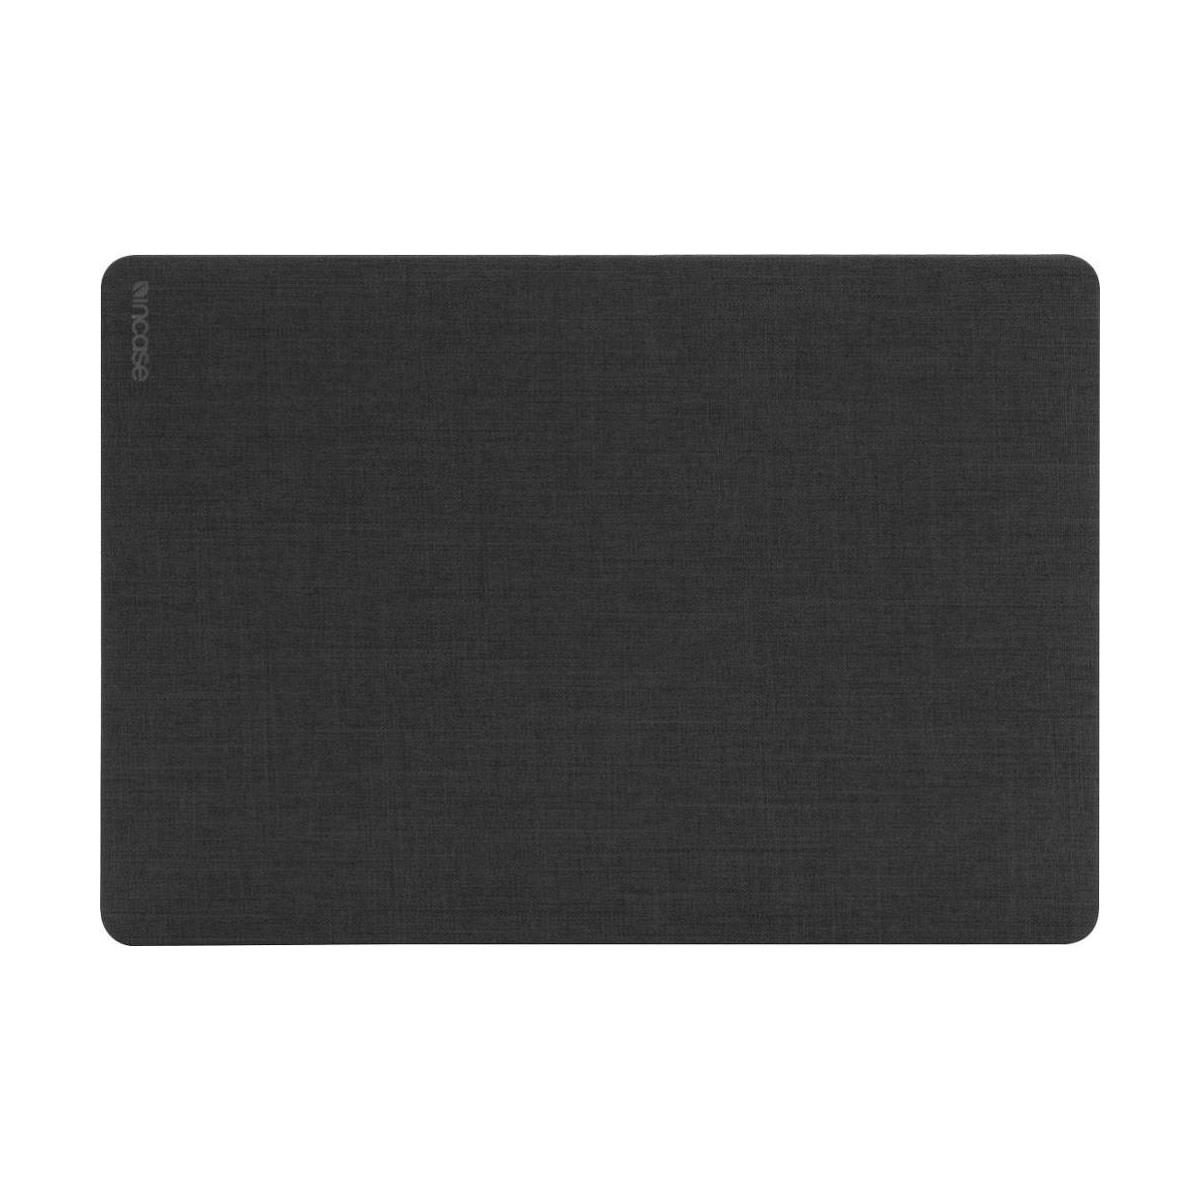 

Incase Hardshell Case for 15.4" MacBook Pro with Touch Bar, Graphite